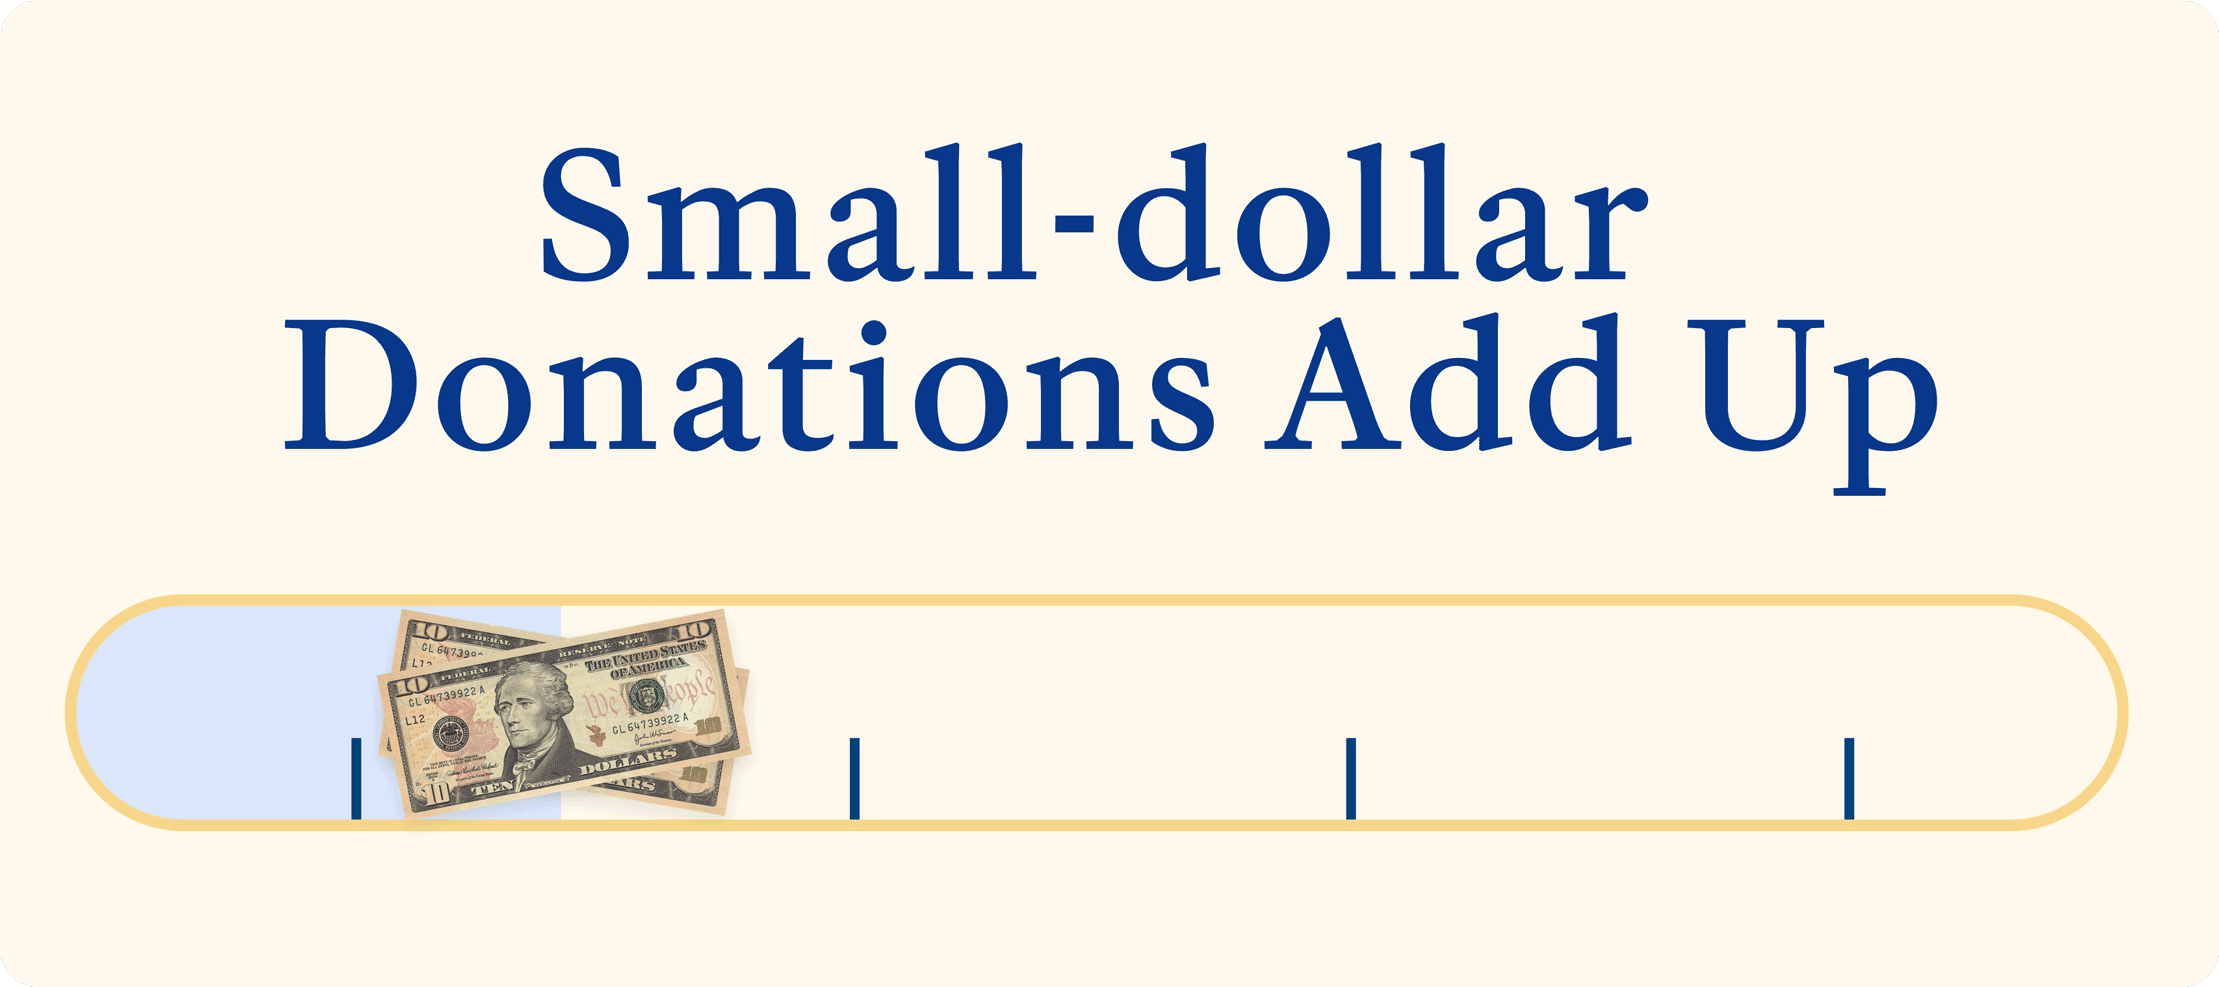 Small-dollar donations add up